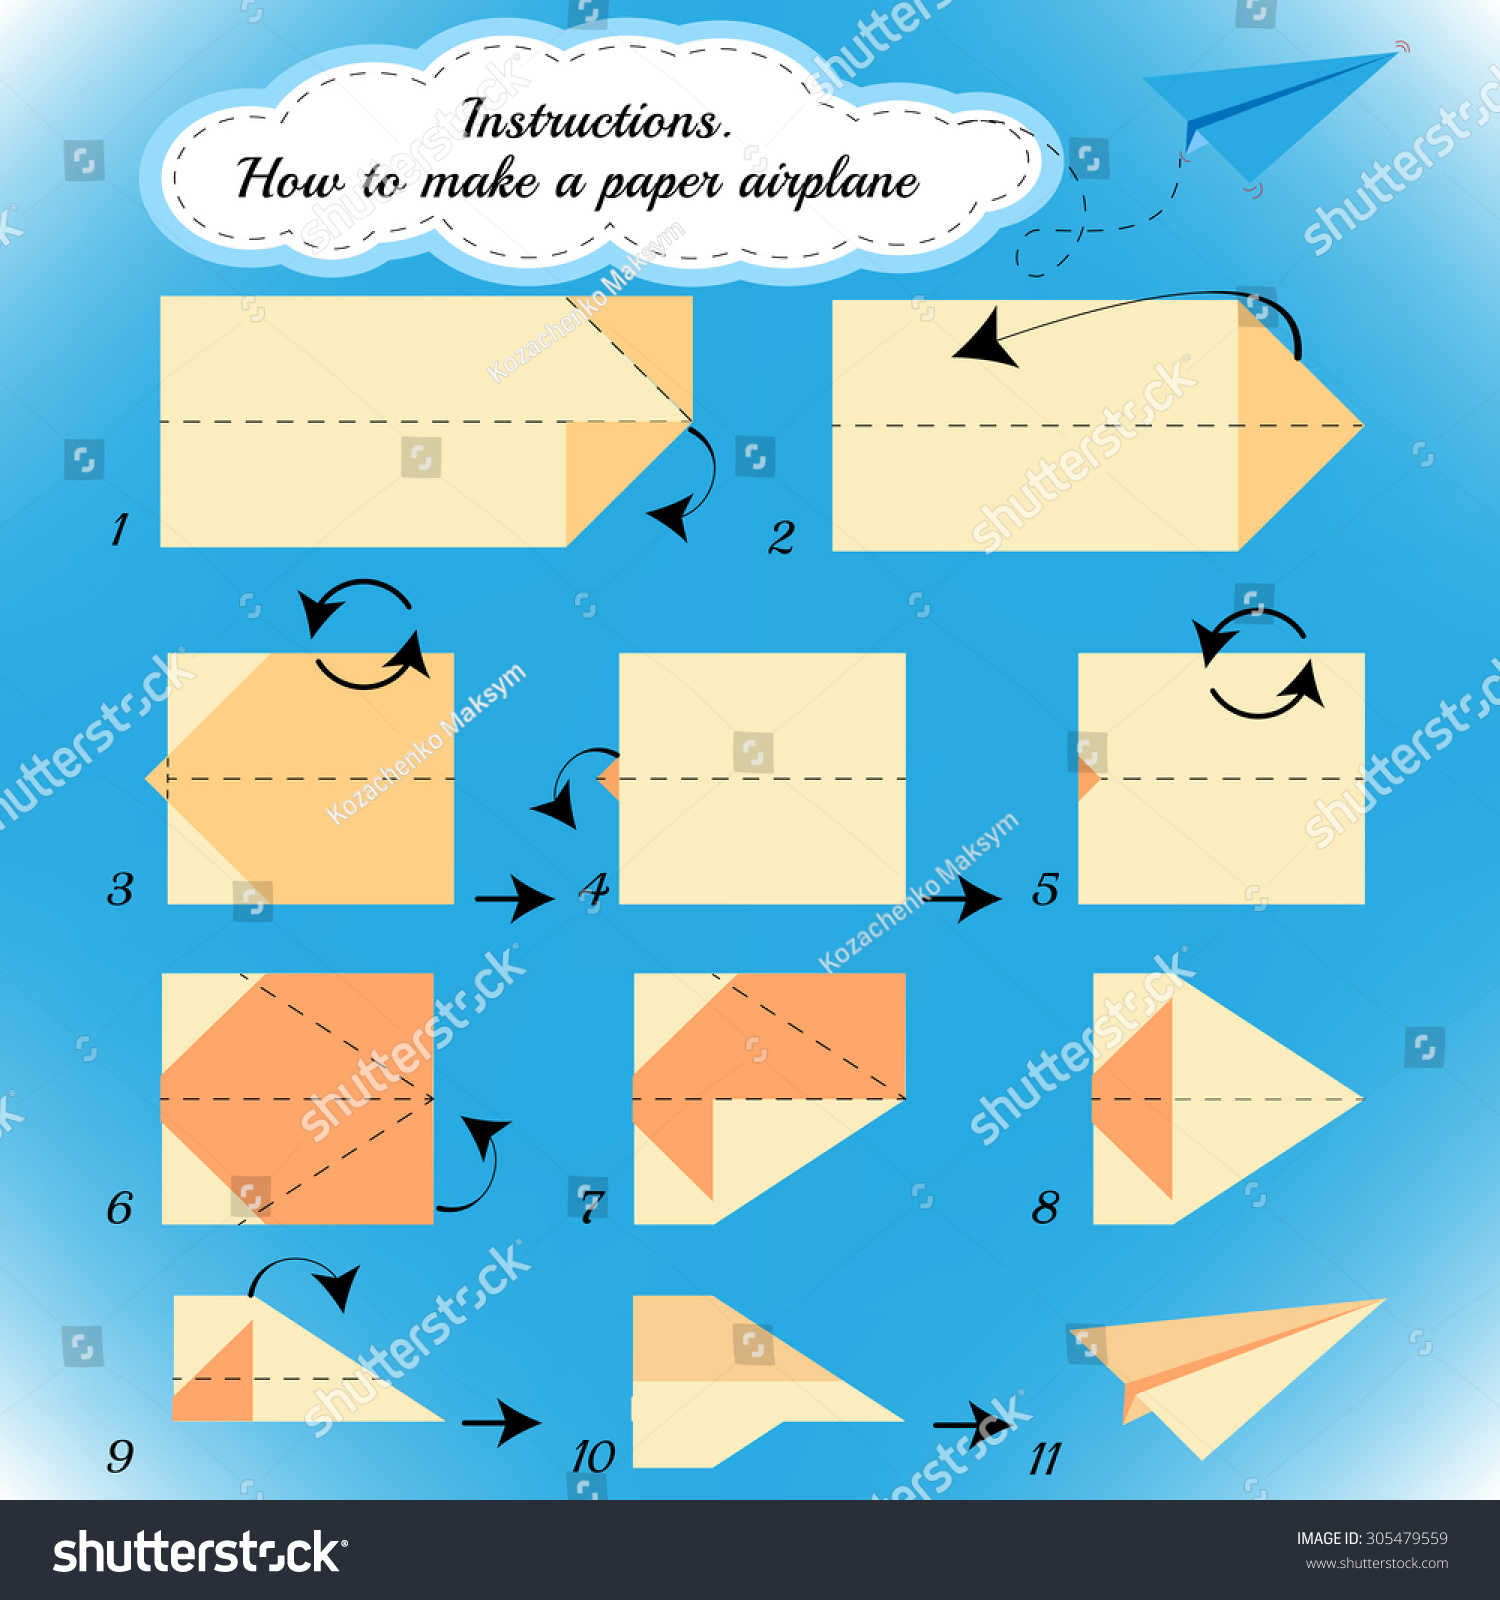 50 awesome paper airplanes. step by step instructions